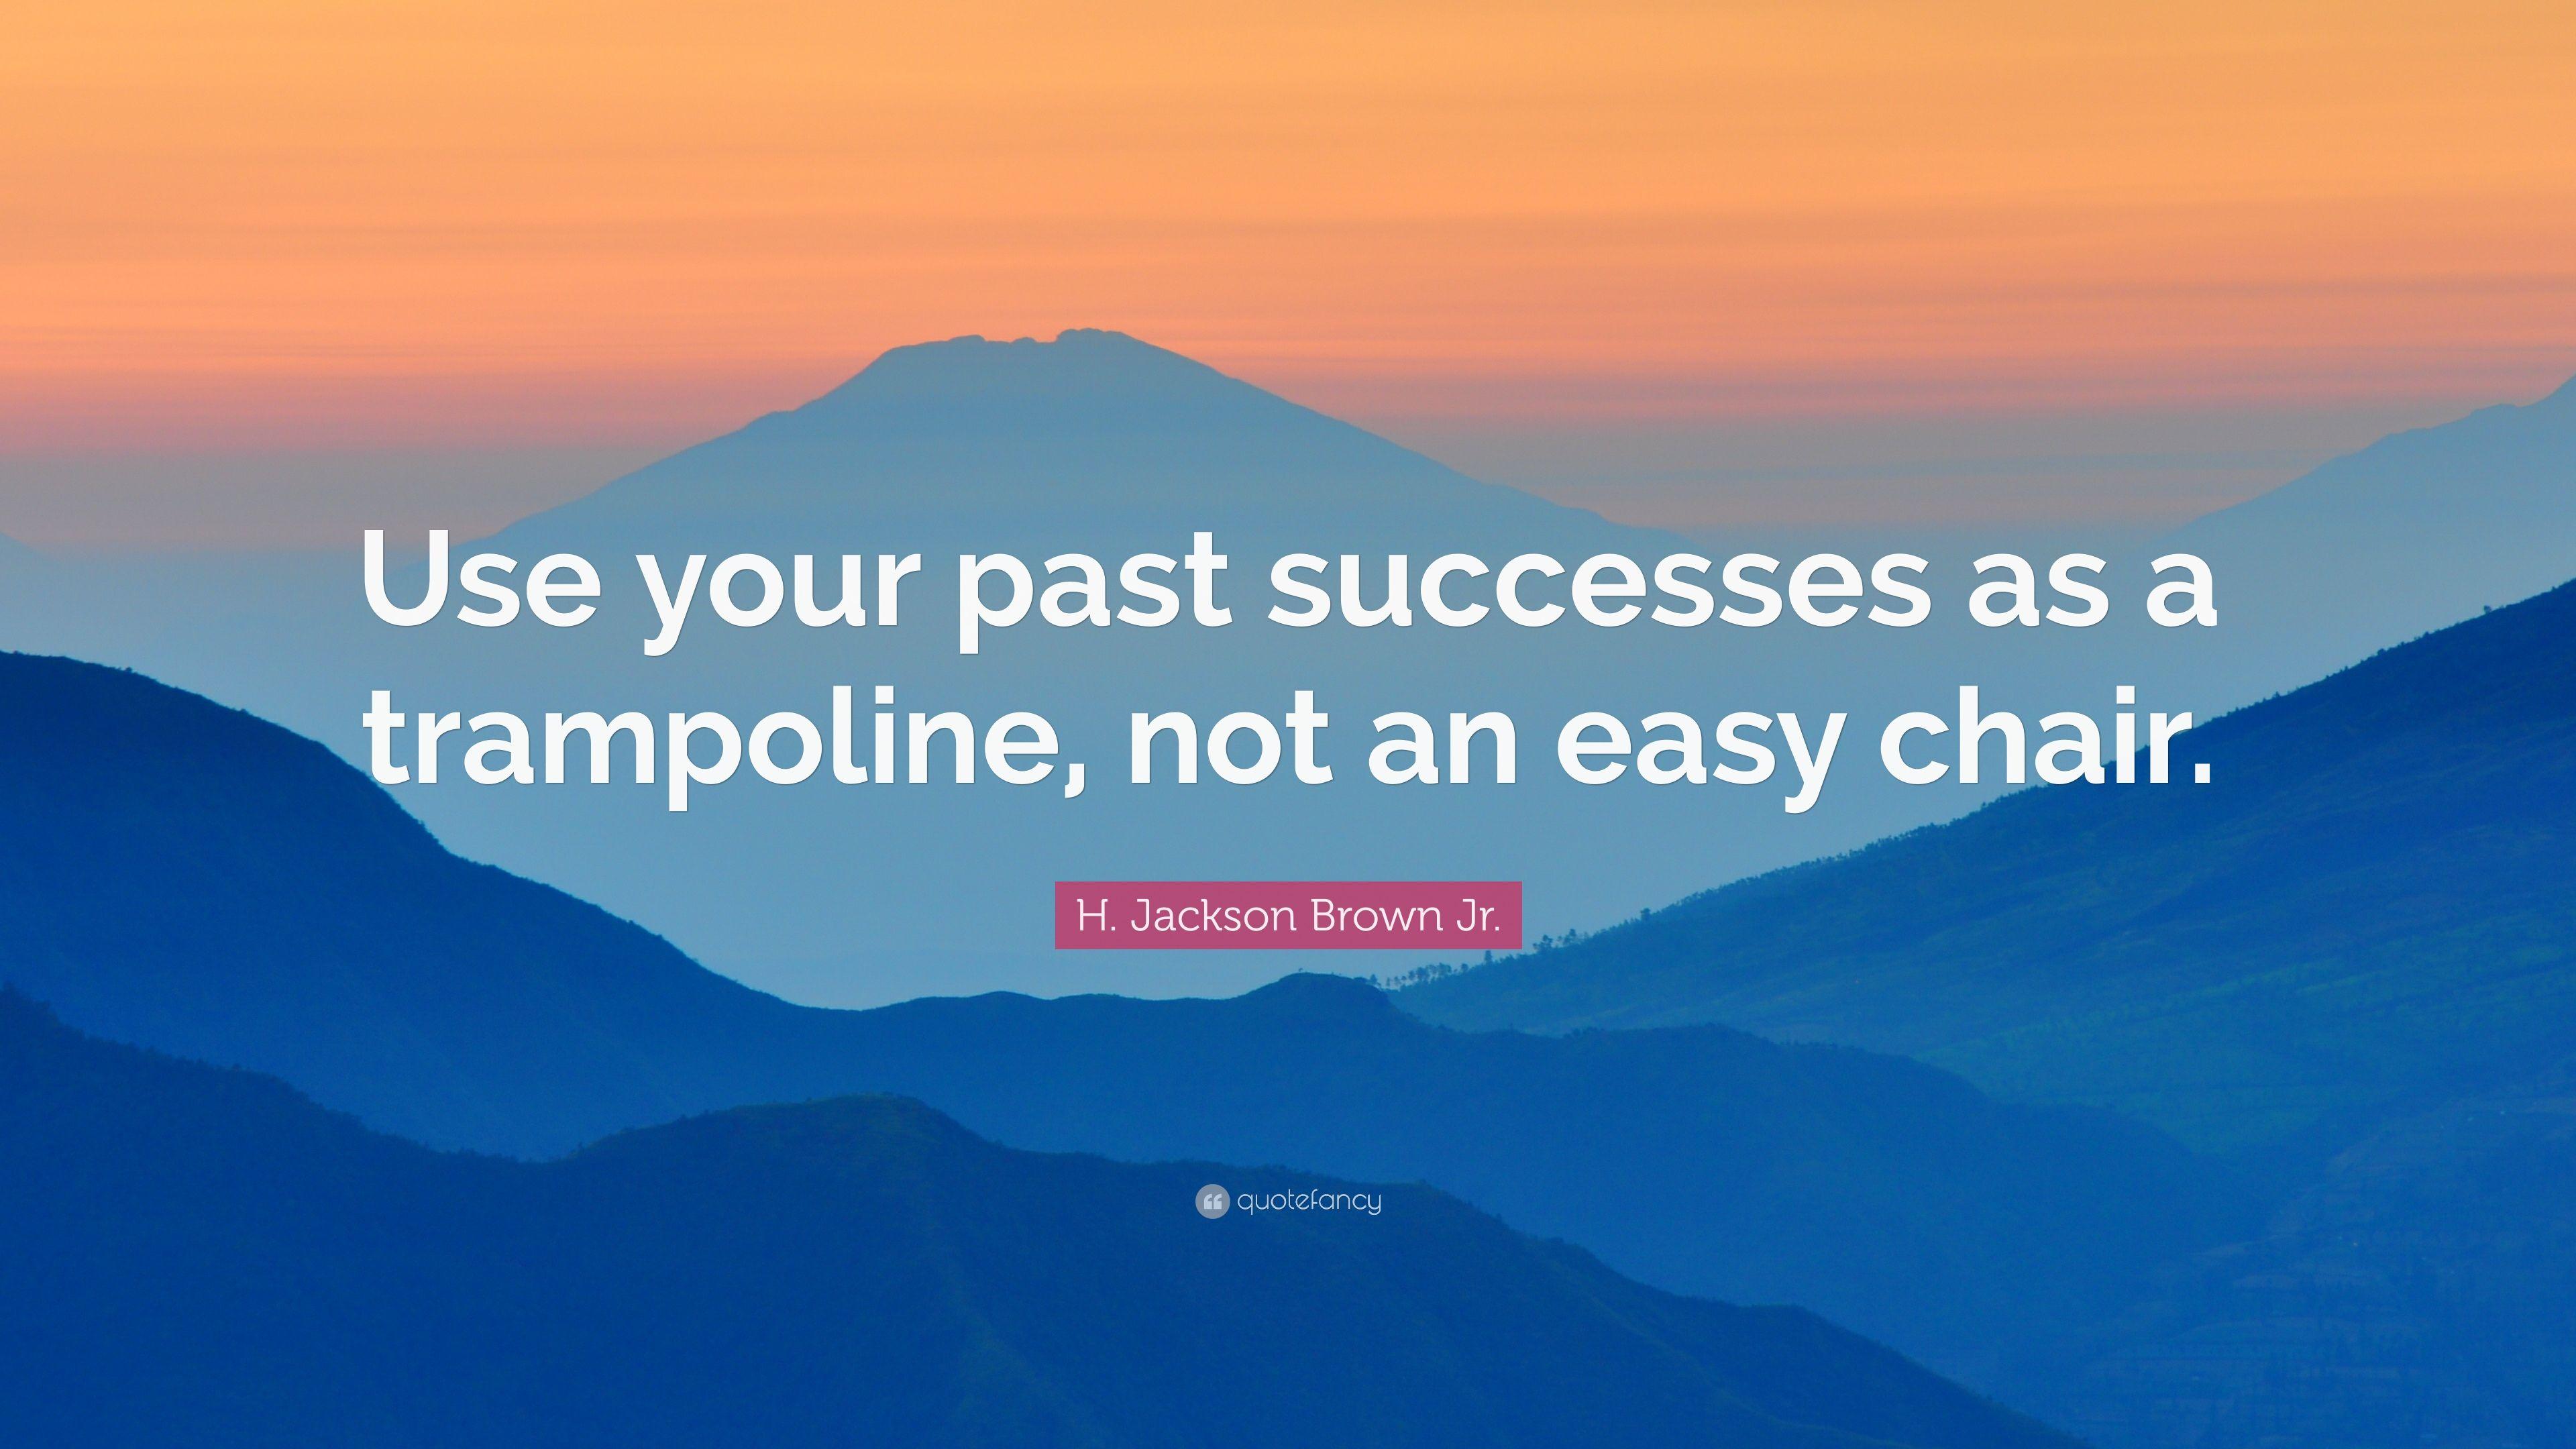 H. Jackson Brown Jr. Quote: “Use your past successes as a trampoline